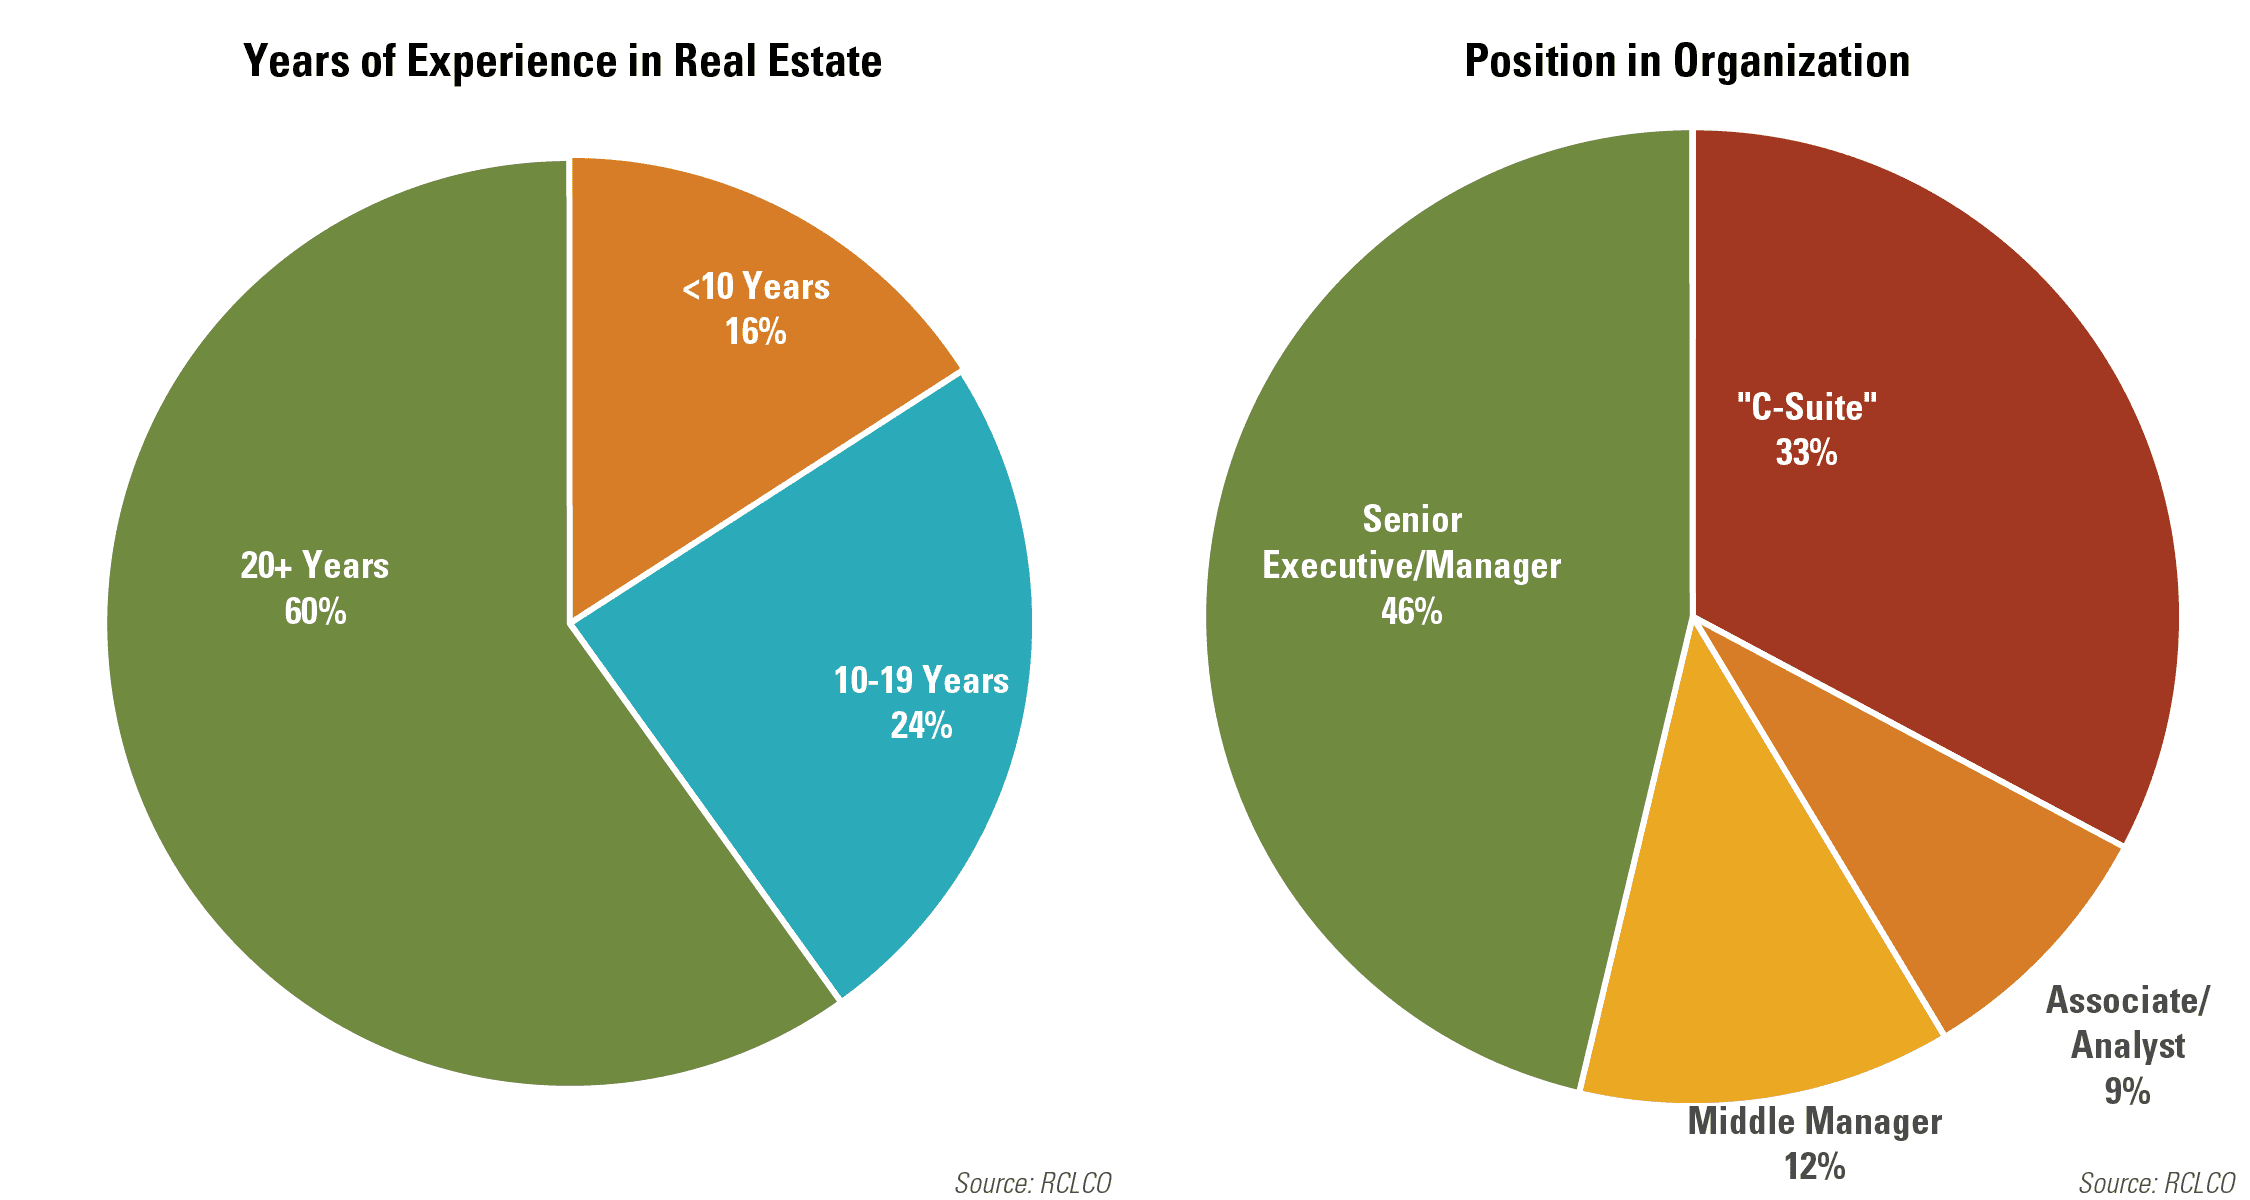 Years of Experience in Real Estate